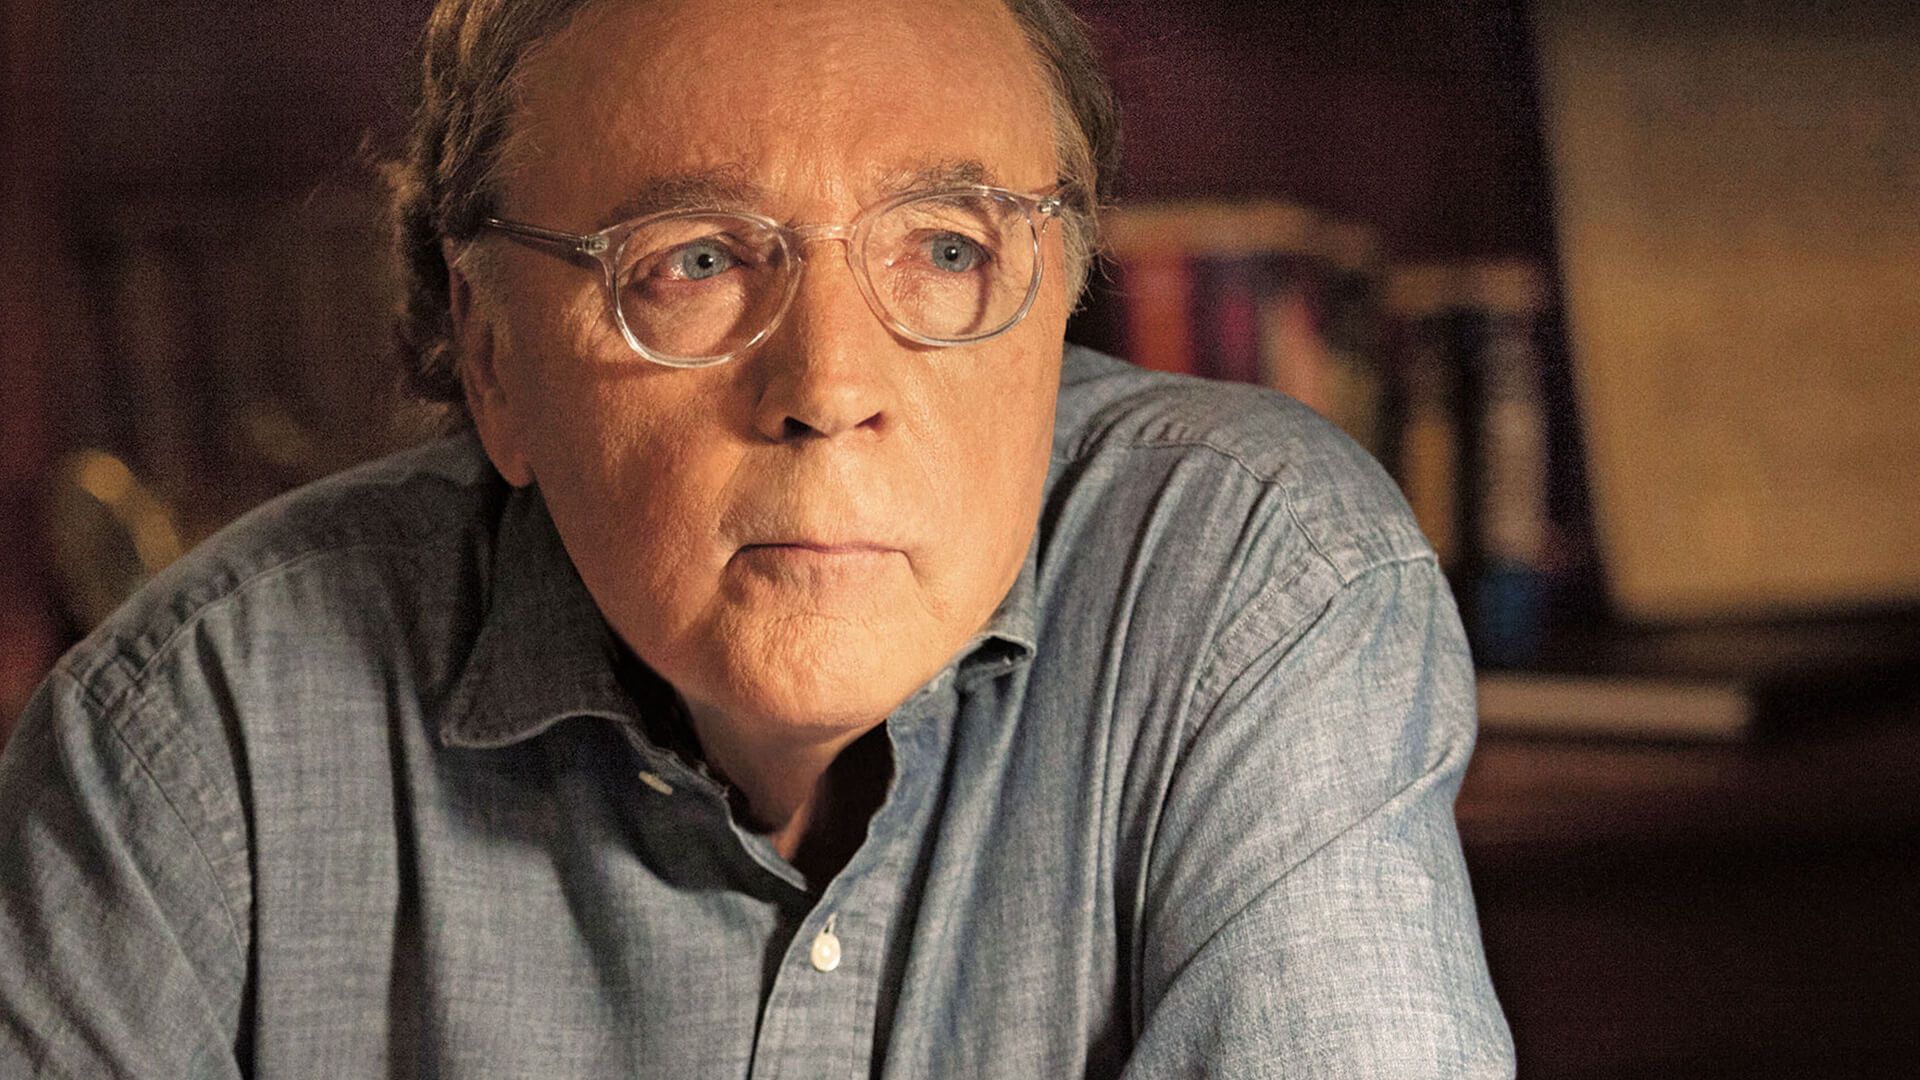 The Bookseller - Rights - James Patterson completes late author Crichton's  novel